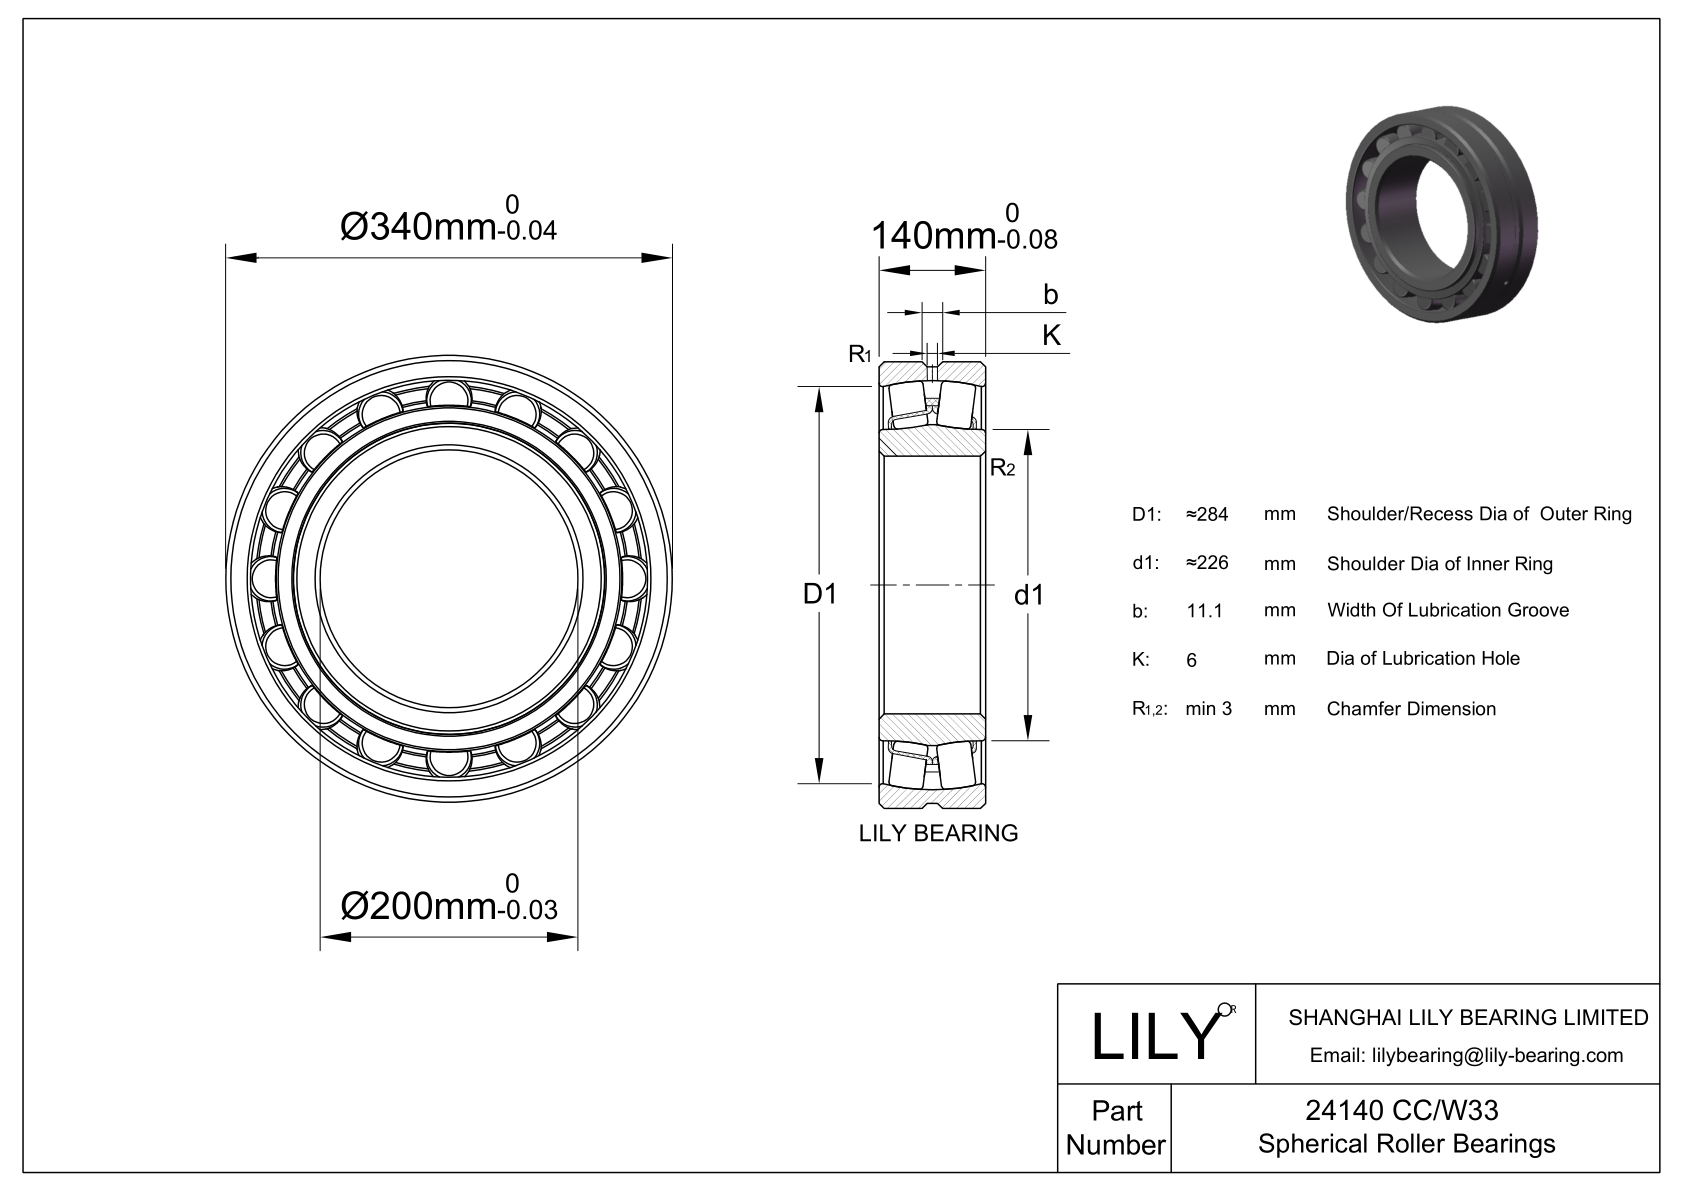 24140 CC/W33 Double Row Spherical Roller Bearing cad drawing